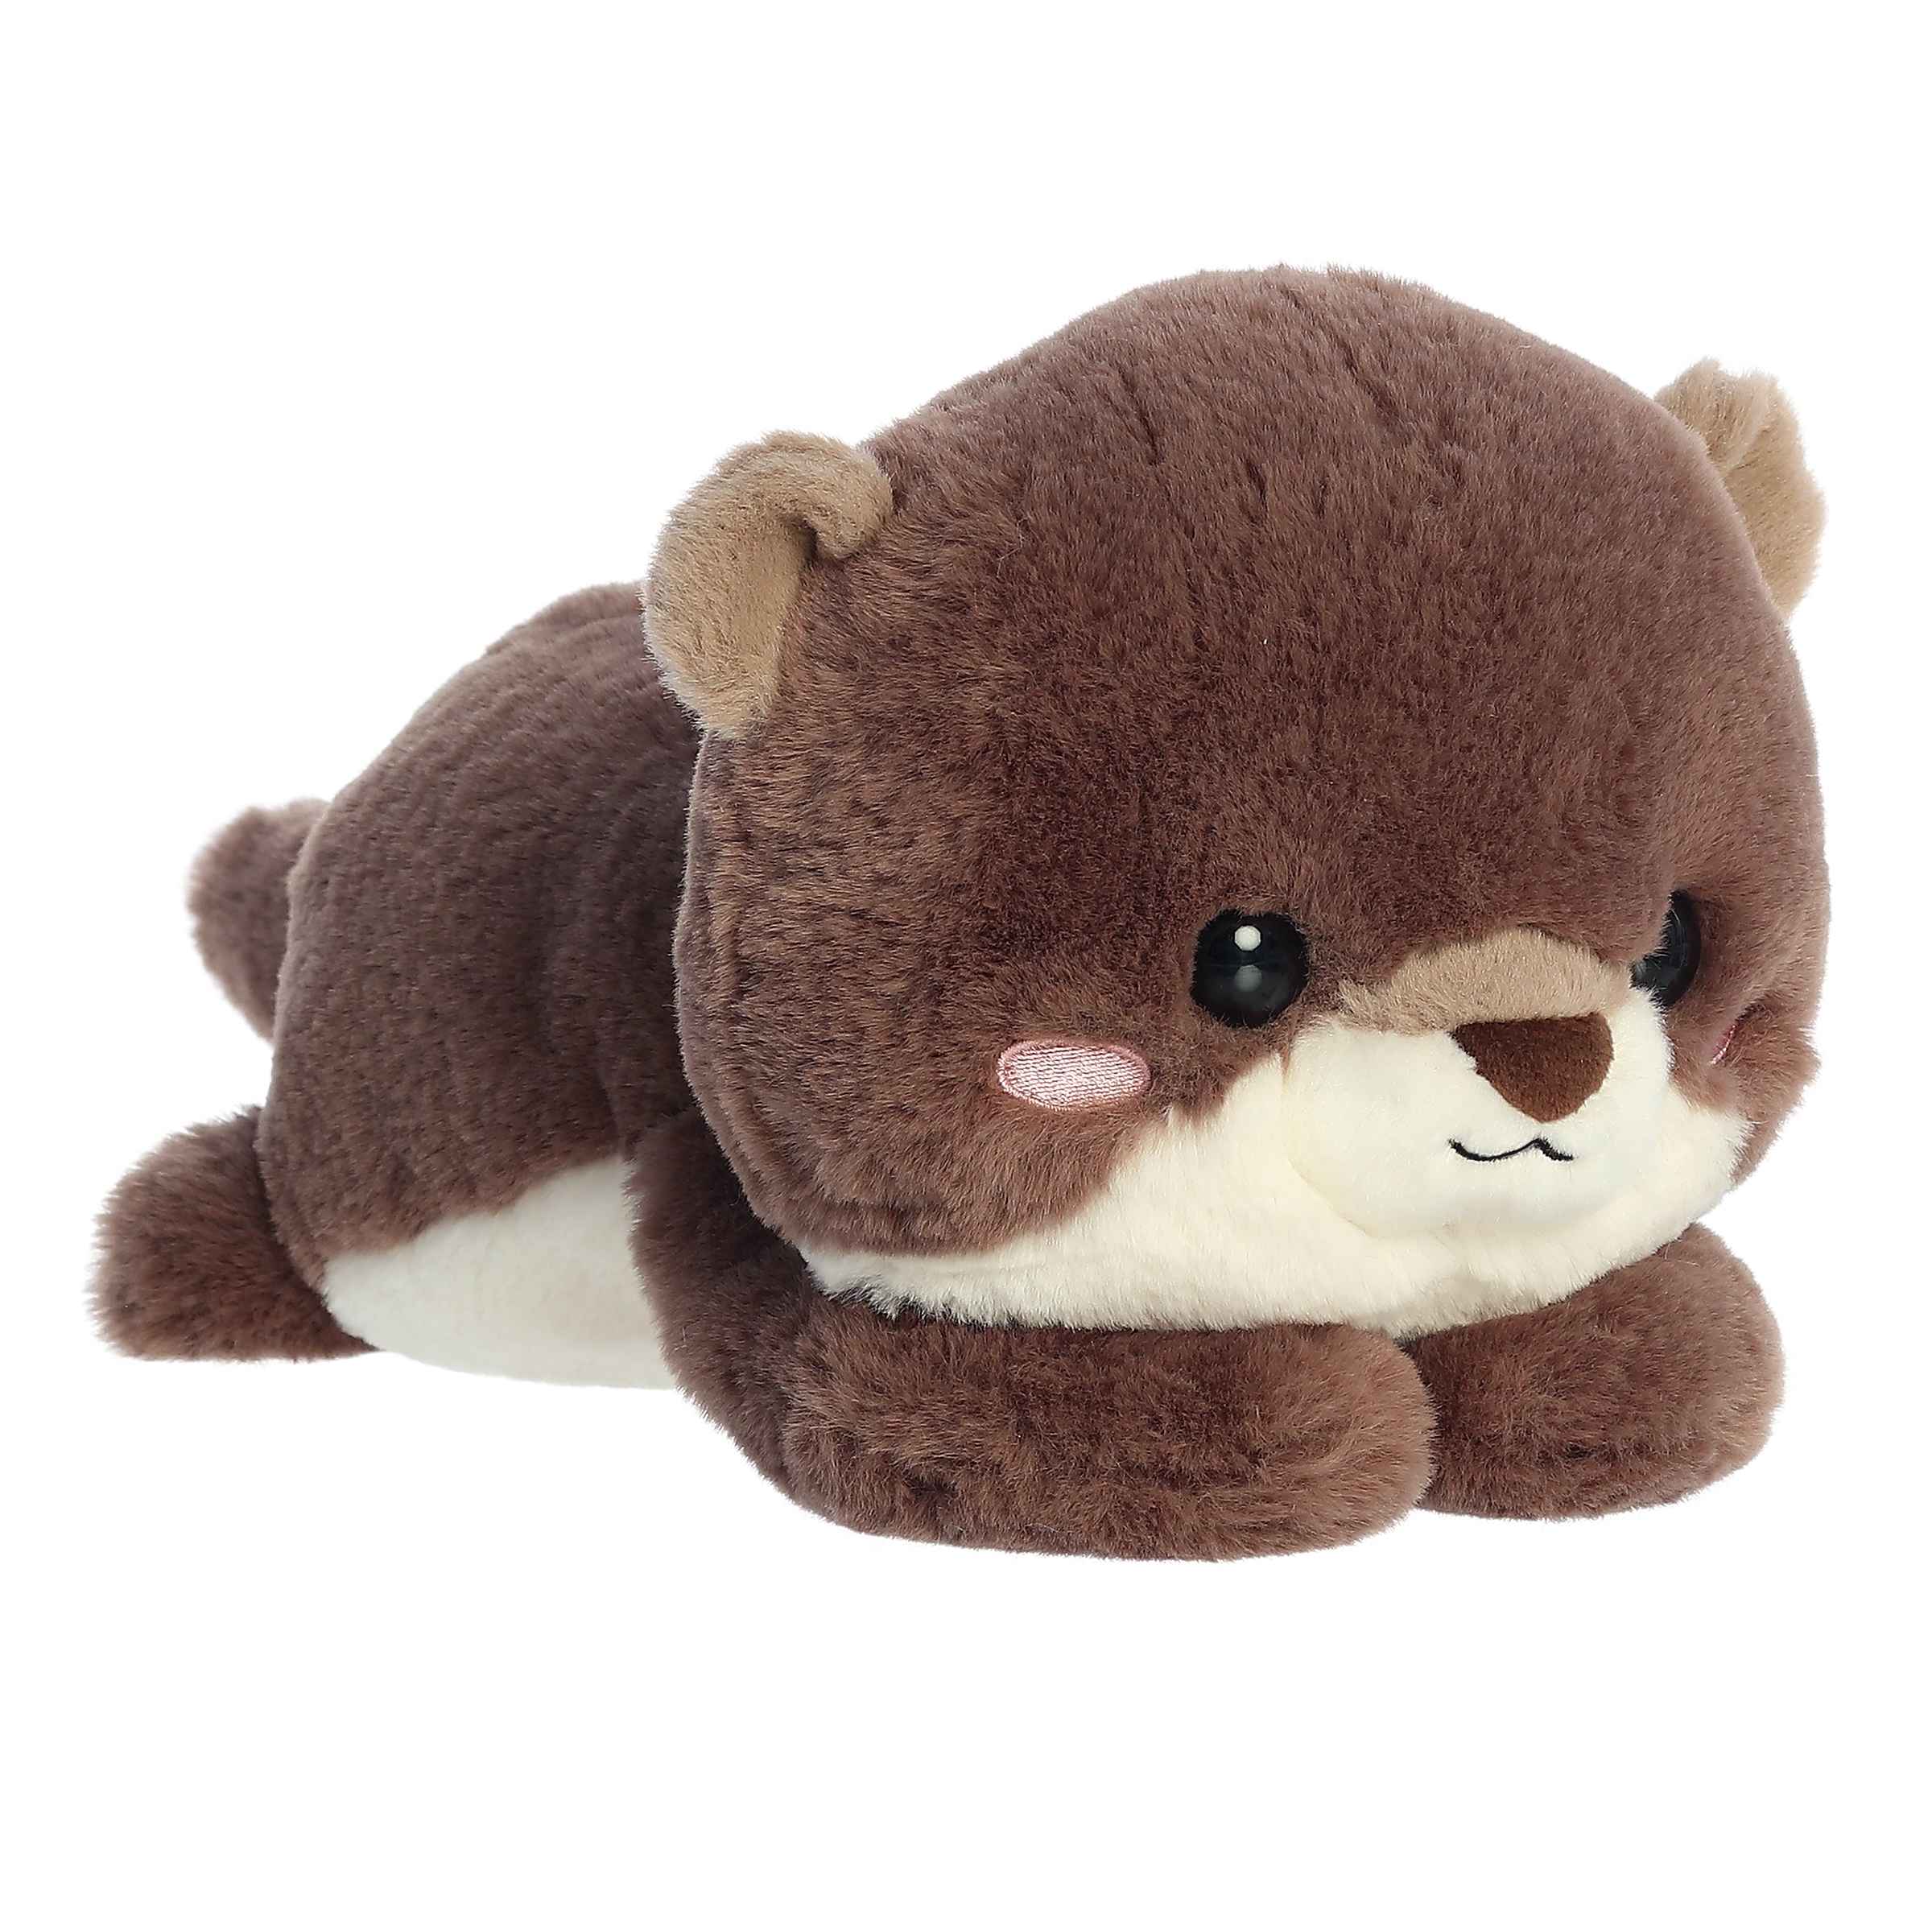 Oddie Otter plush from Too Cute Collection, chestnut coat with a cream belly